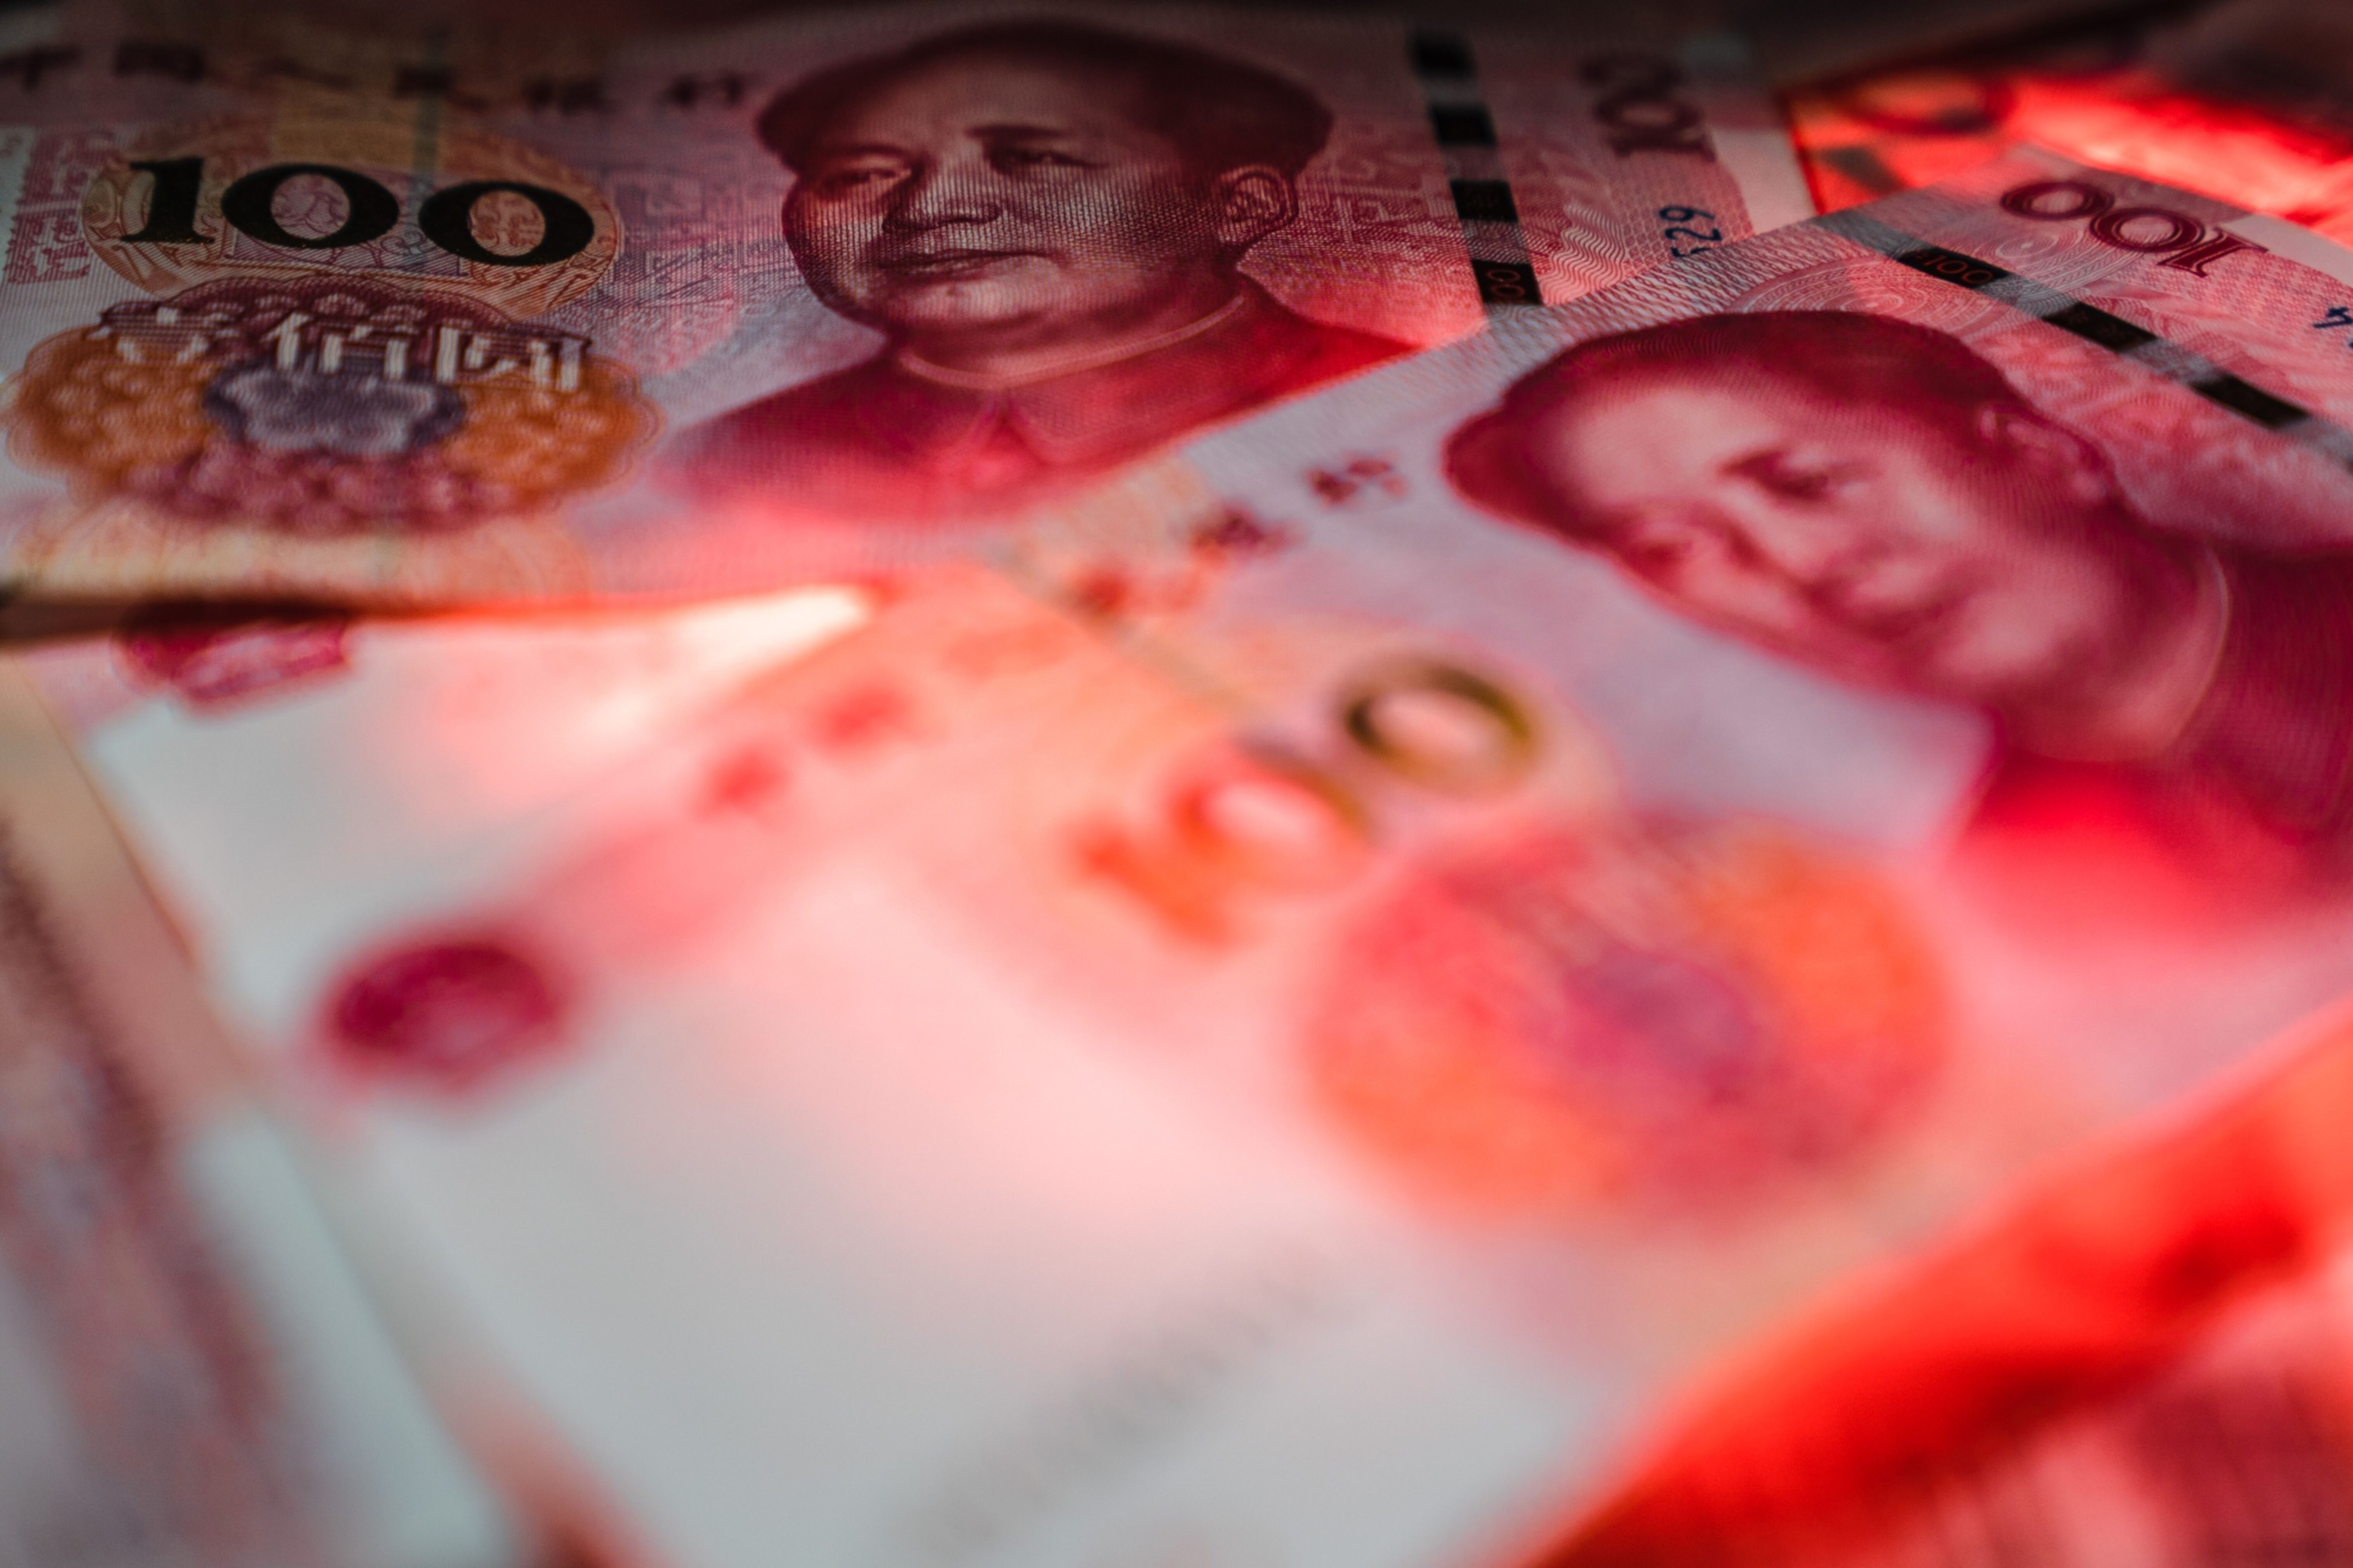 Equipment renewal projects can receive support from the Chinese central government budget alongside tax breaks and targeted lending from banks. Photo: Bloomberg